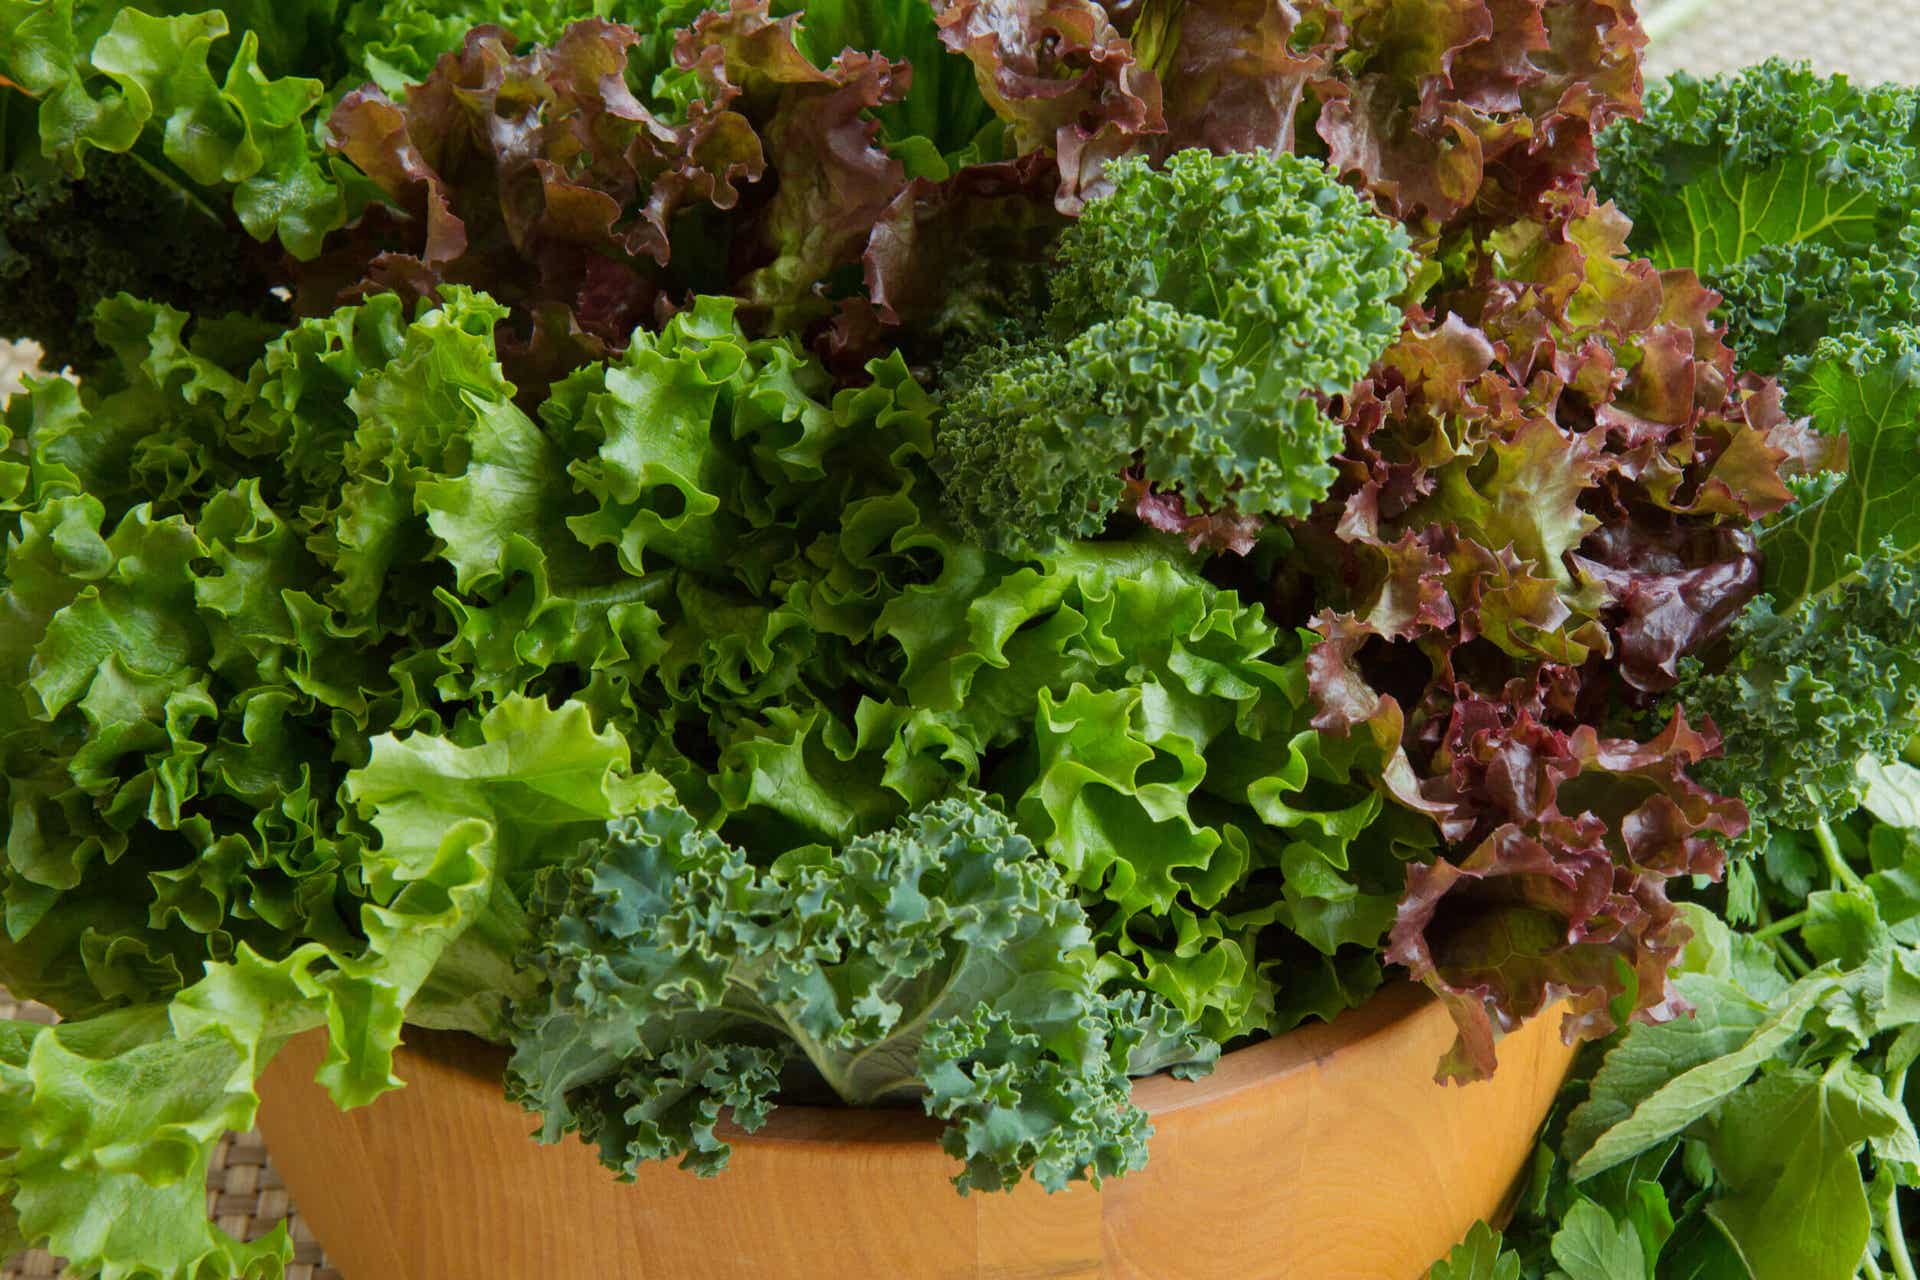 Red and green lettuce in a bowl.